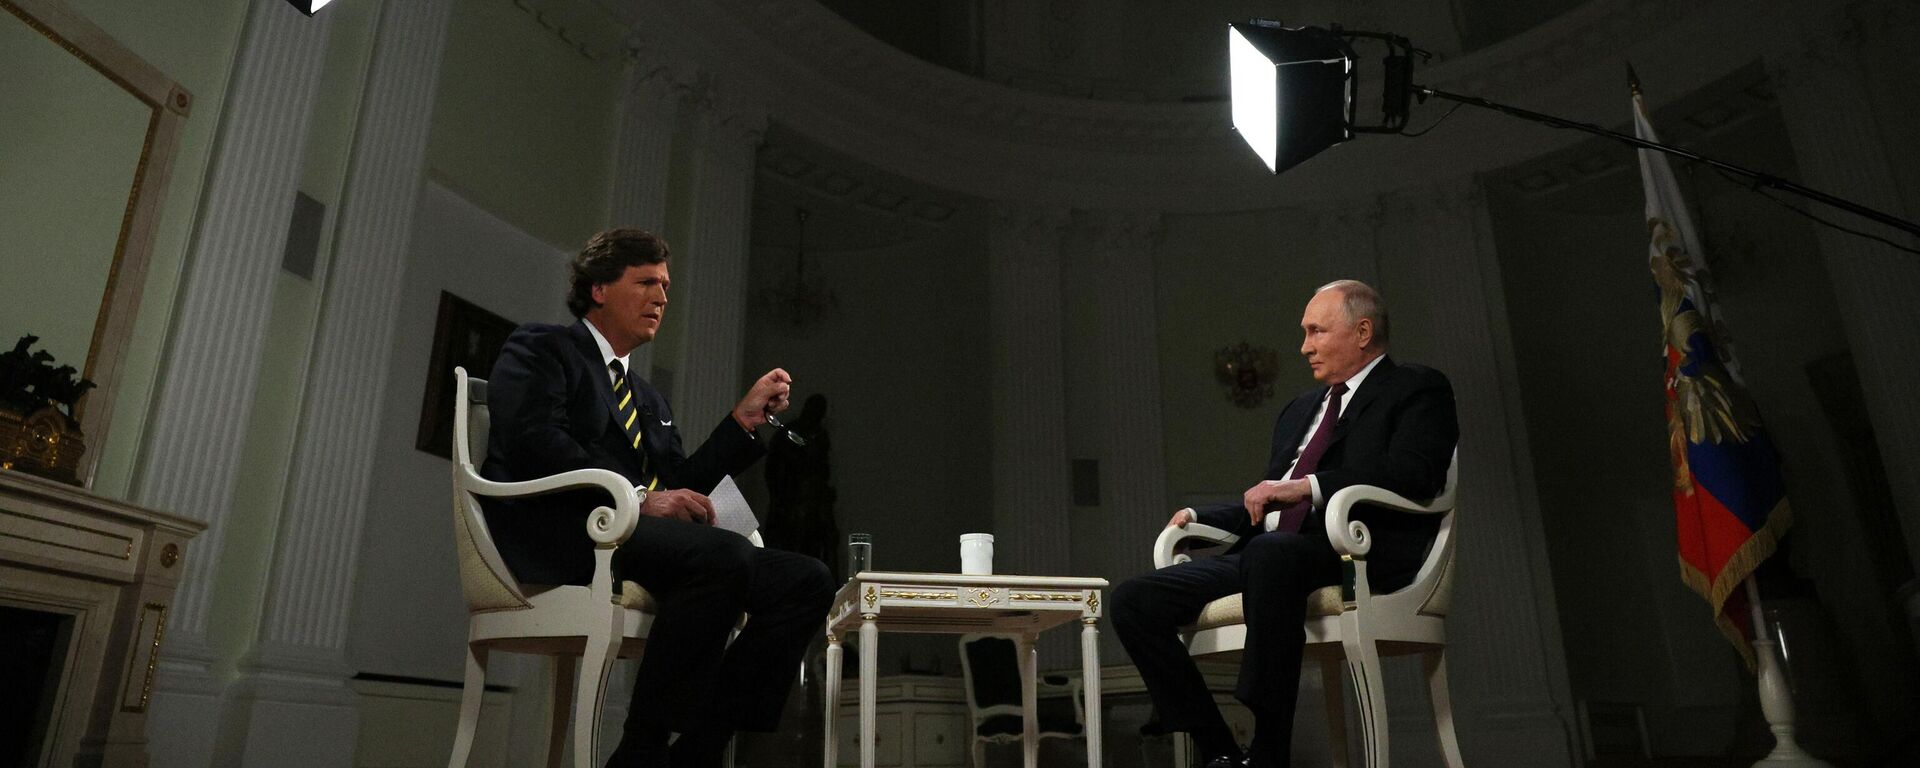 Russian President Vladimir Putin listens to a question during an interview with US journalist Tucker Carlson at the Kremlin in Moscow, Russia. - Sputnik International, 1920, 09.02.2024